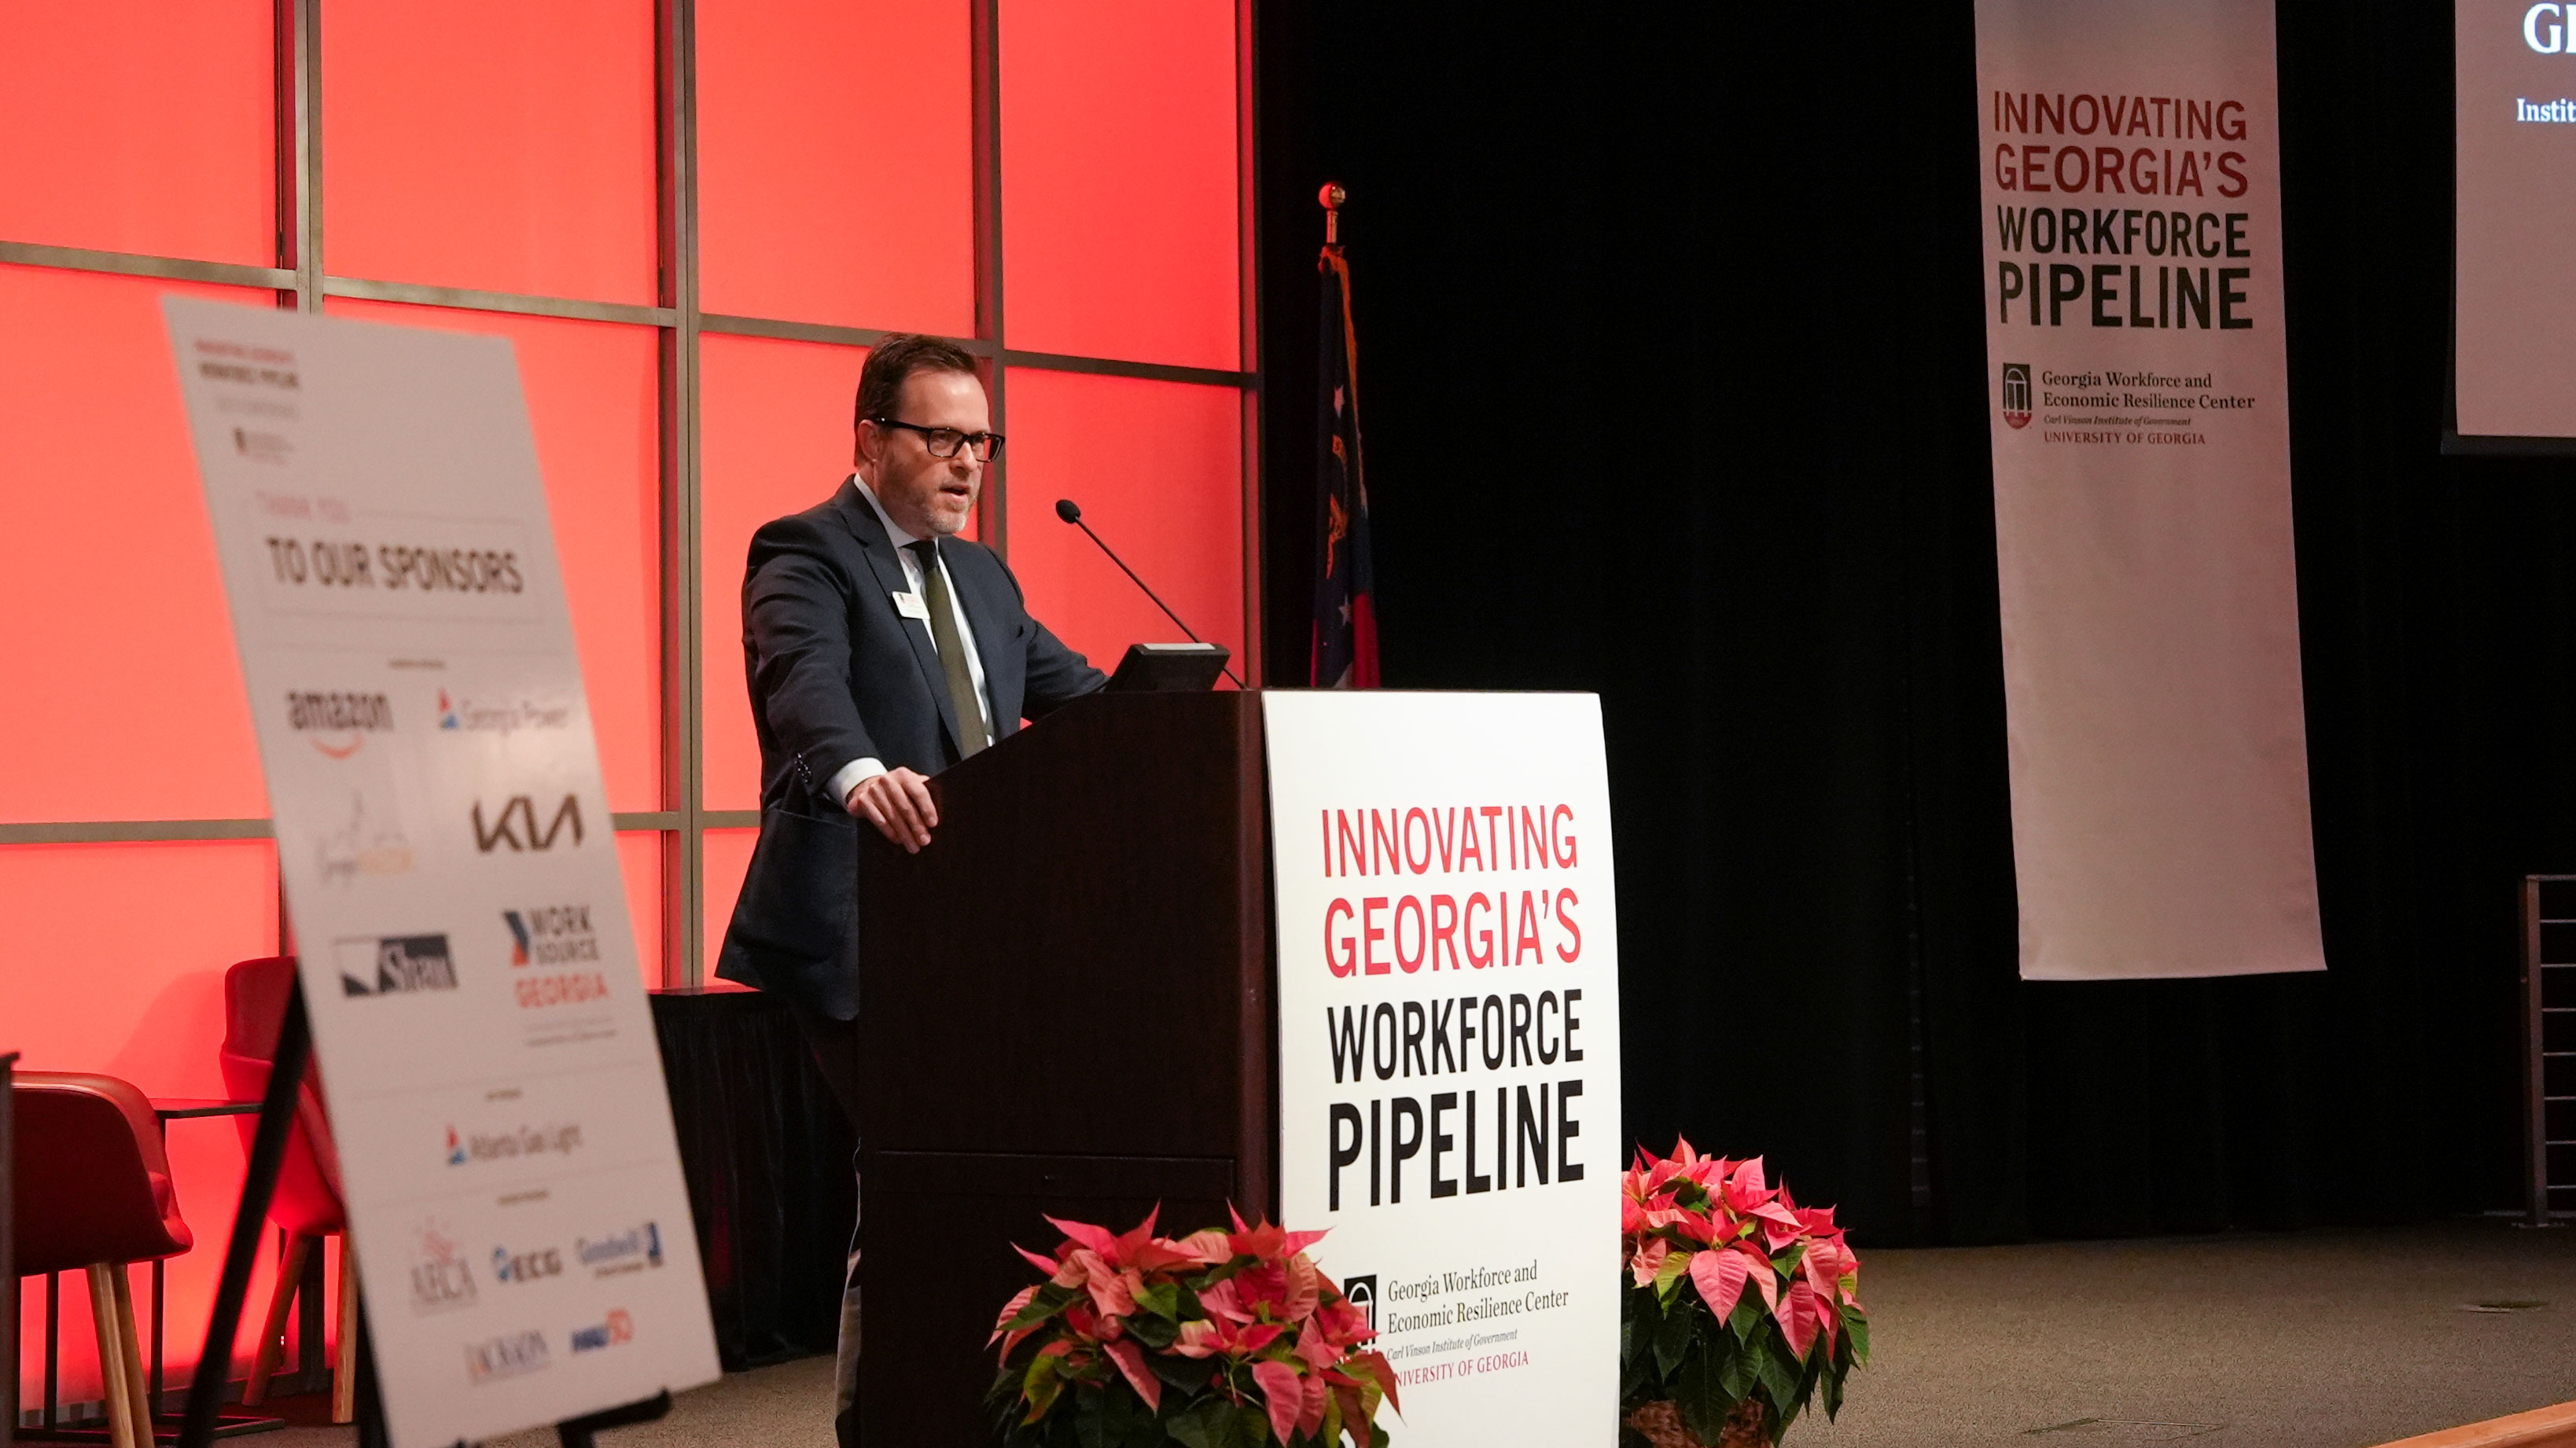 UGA Carl Vinson Institute of Government Director Rob Gordon speaks during the opening plenary at the Innovating Georgia's Workforce Pipeline Conference.